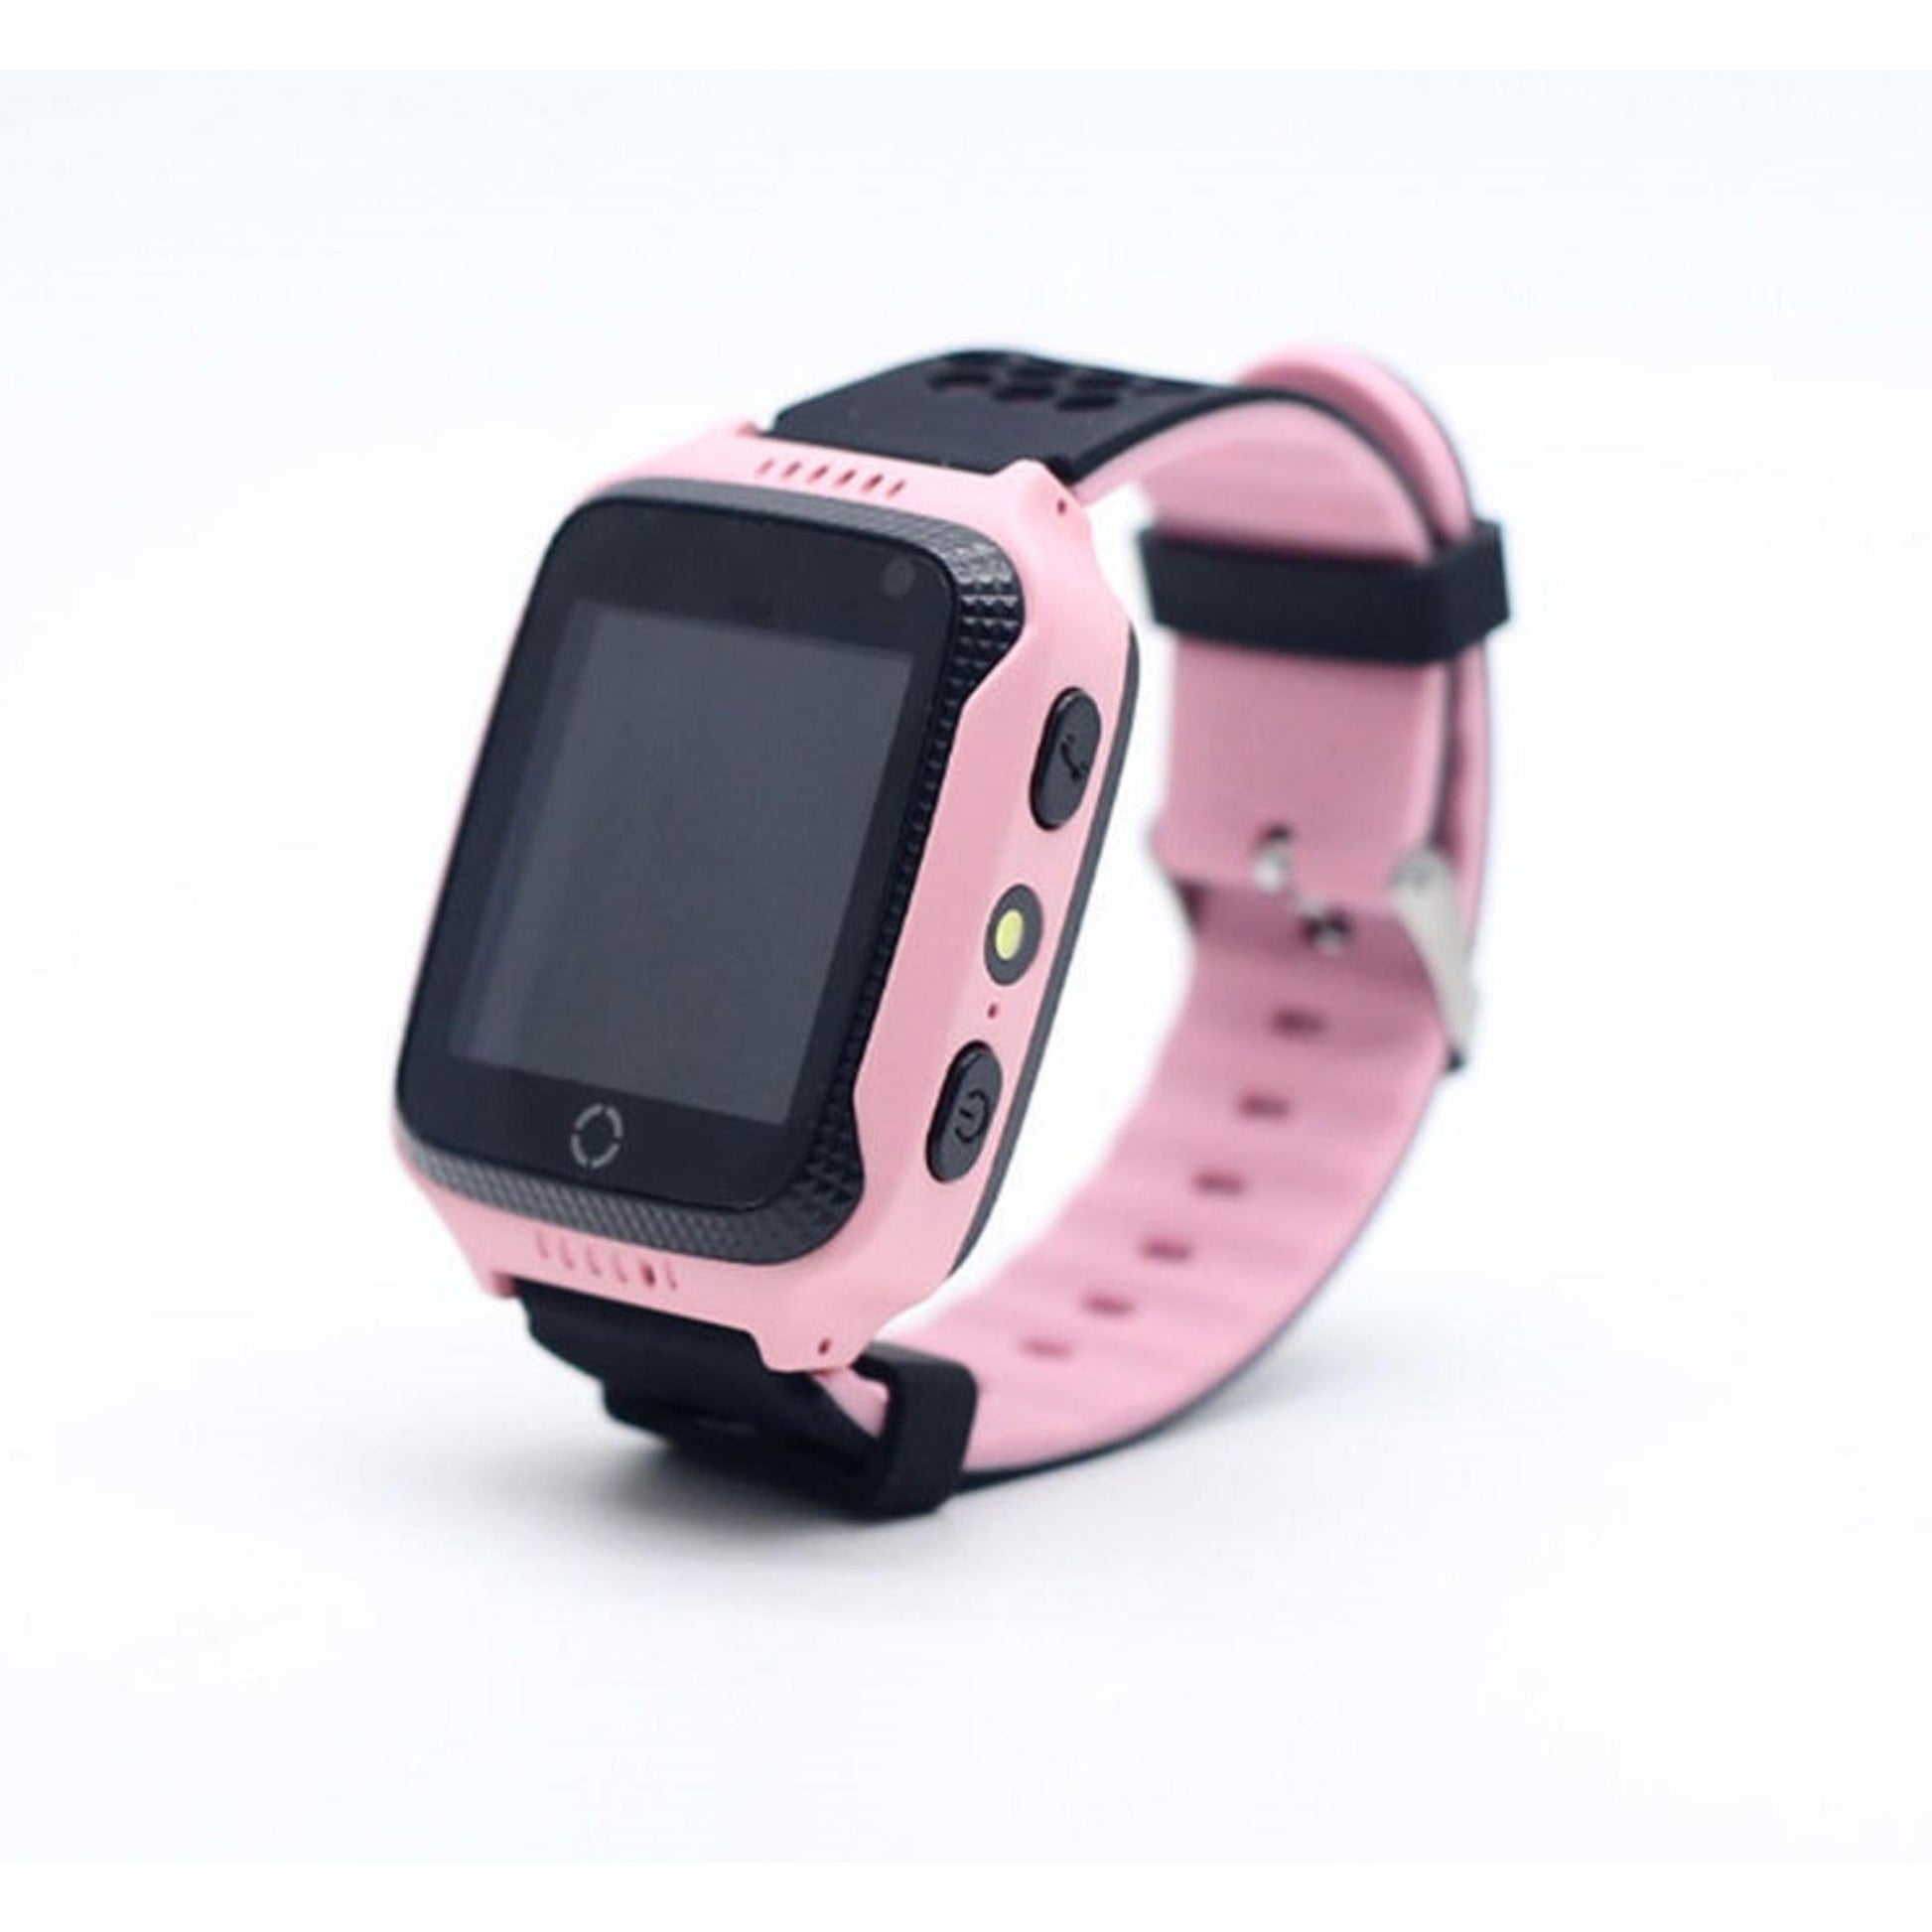 Child's Smartwatch with GPS - Karen M G900A, 1.44-inch Screen, Built-in Camera, Long-lasting Battery. | Blue Chilli Electronics.